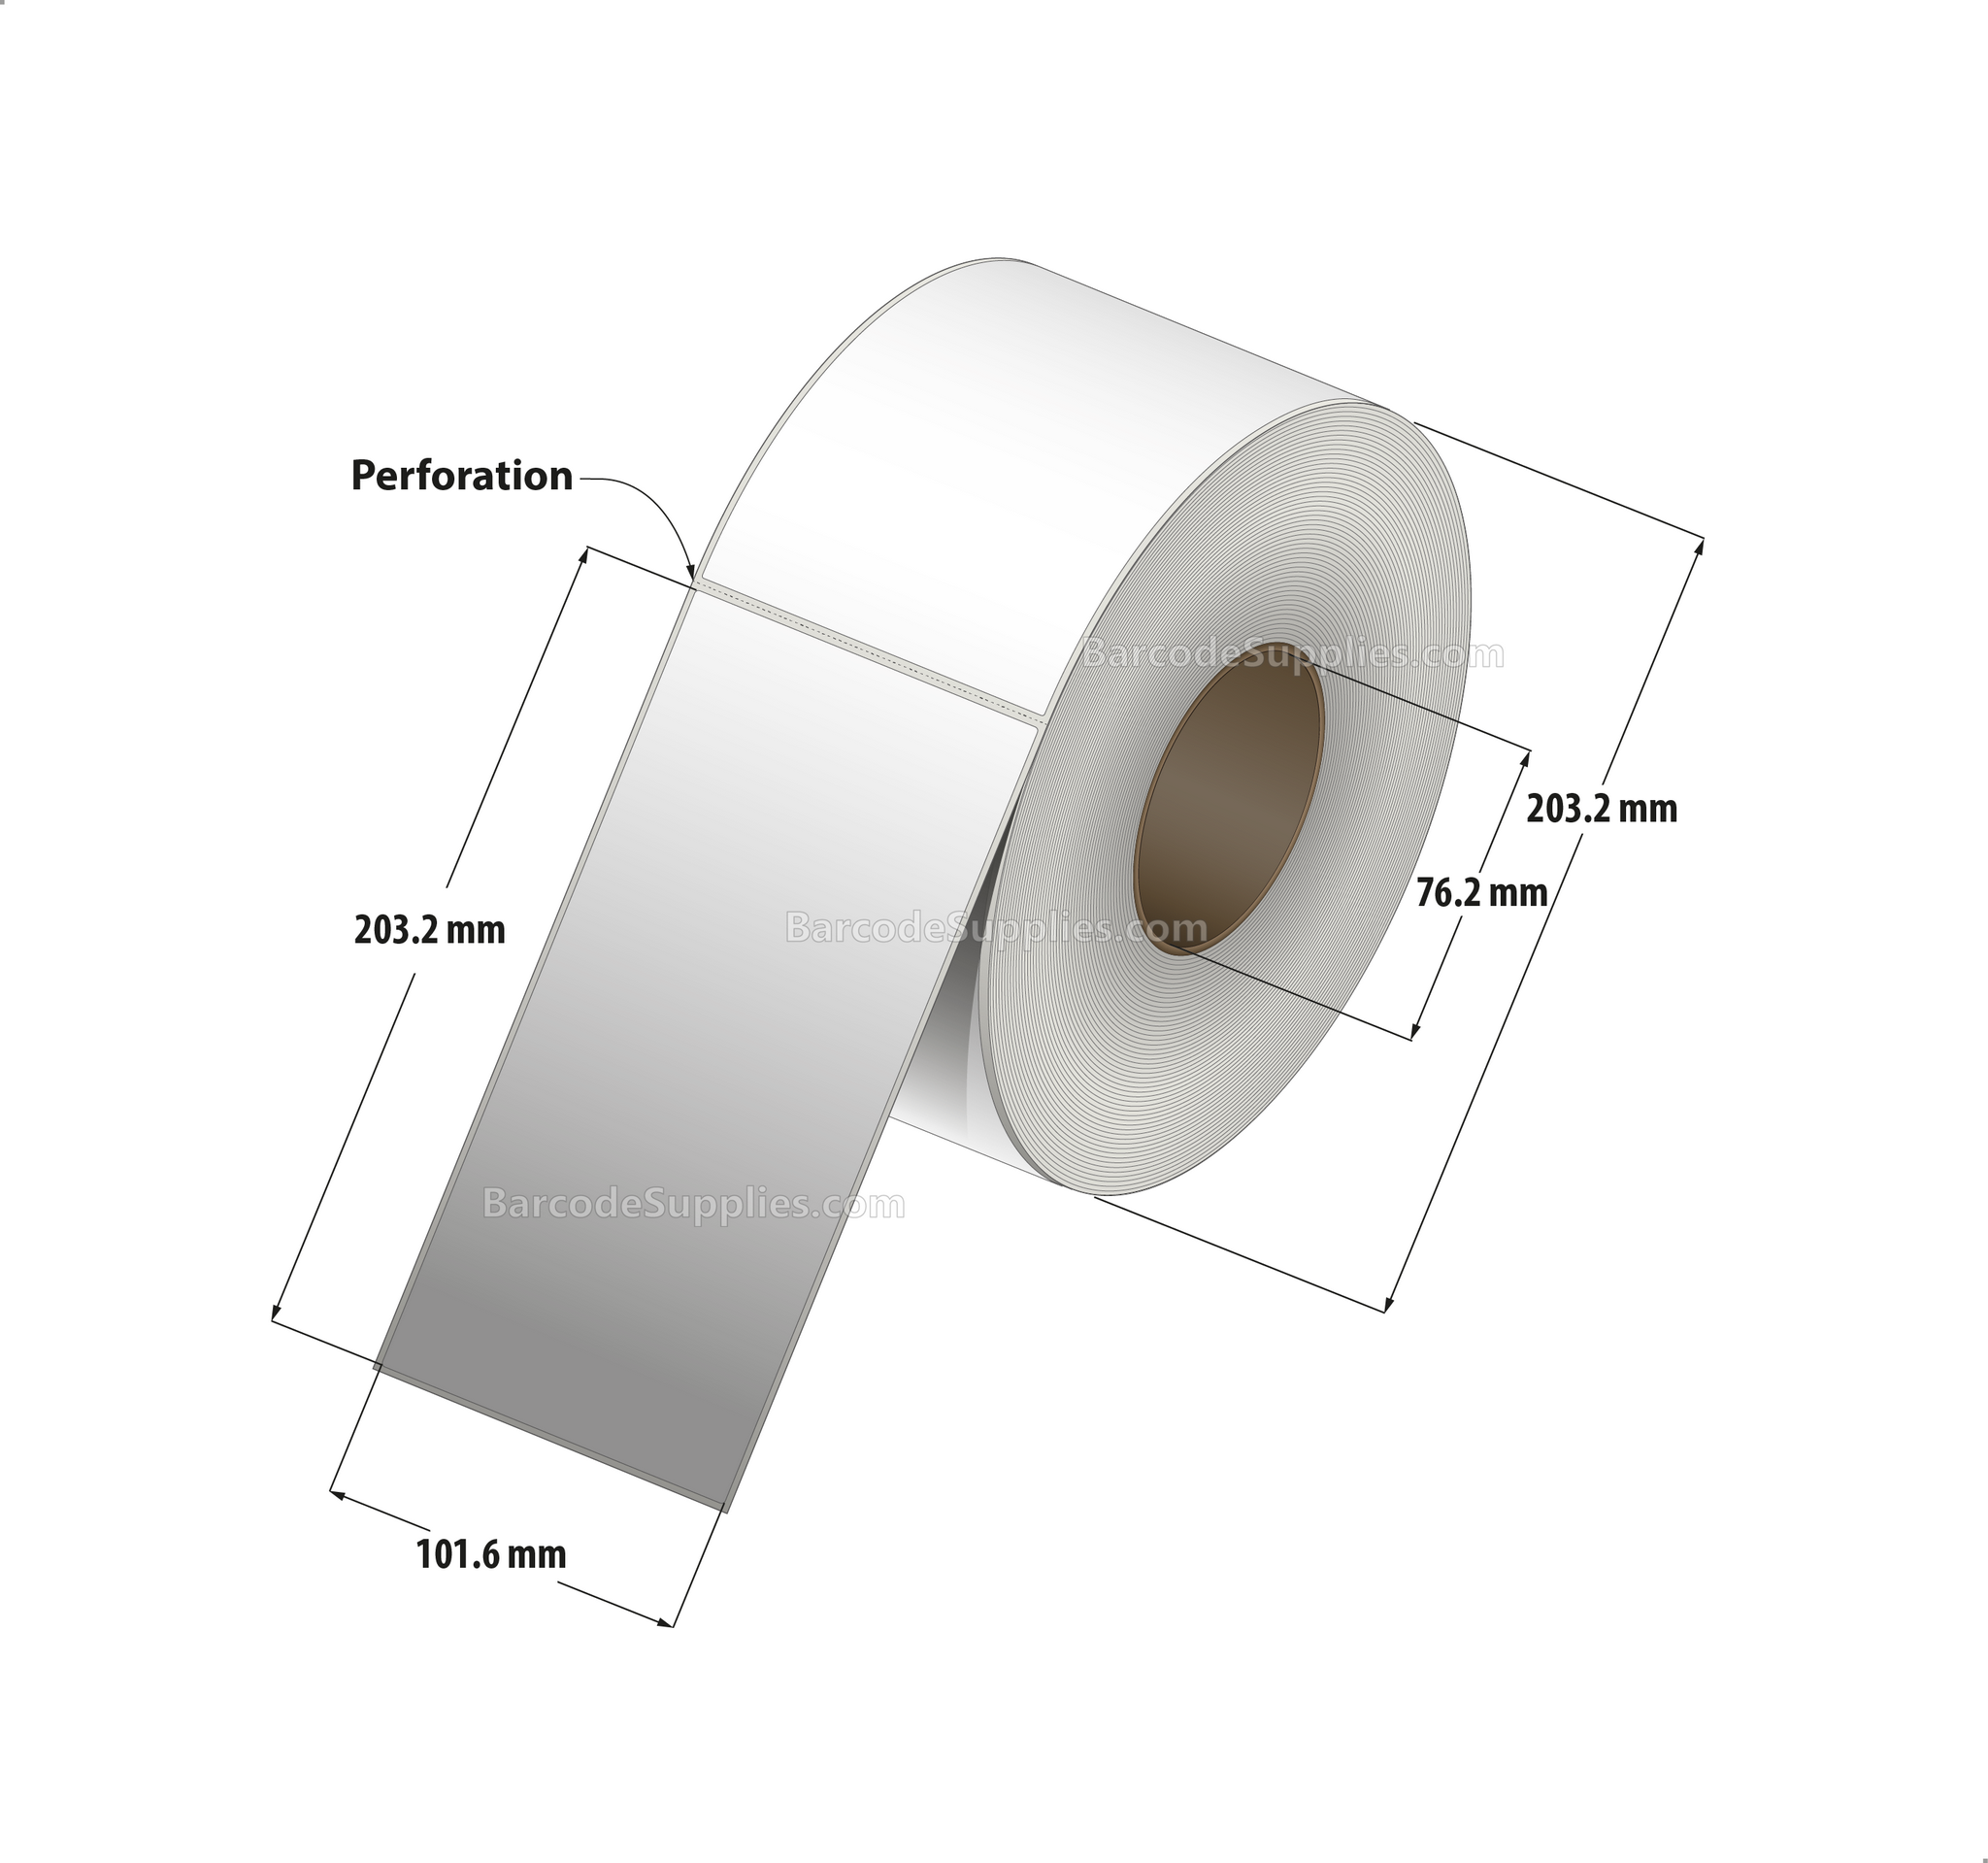 4 x 8 Direct Thermal White Labels With Acrylic Adhesive - Perforated - 750 Labels Per Roll - Carton Of 4 Rolls - 3000 Labels Total - MPN: RD-4-8-750-3 - BarcodeSource, Inc.